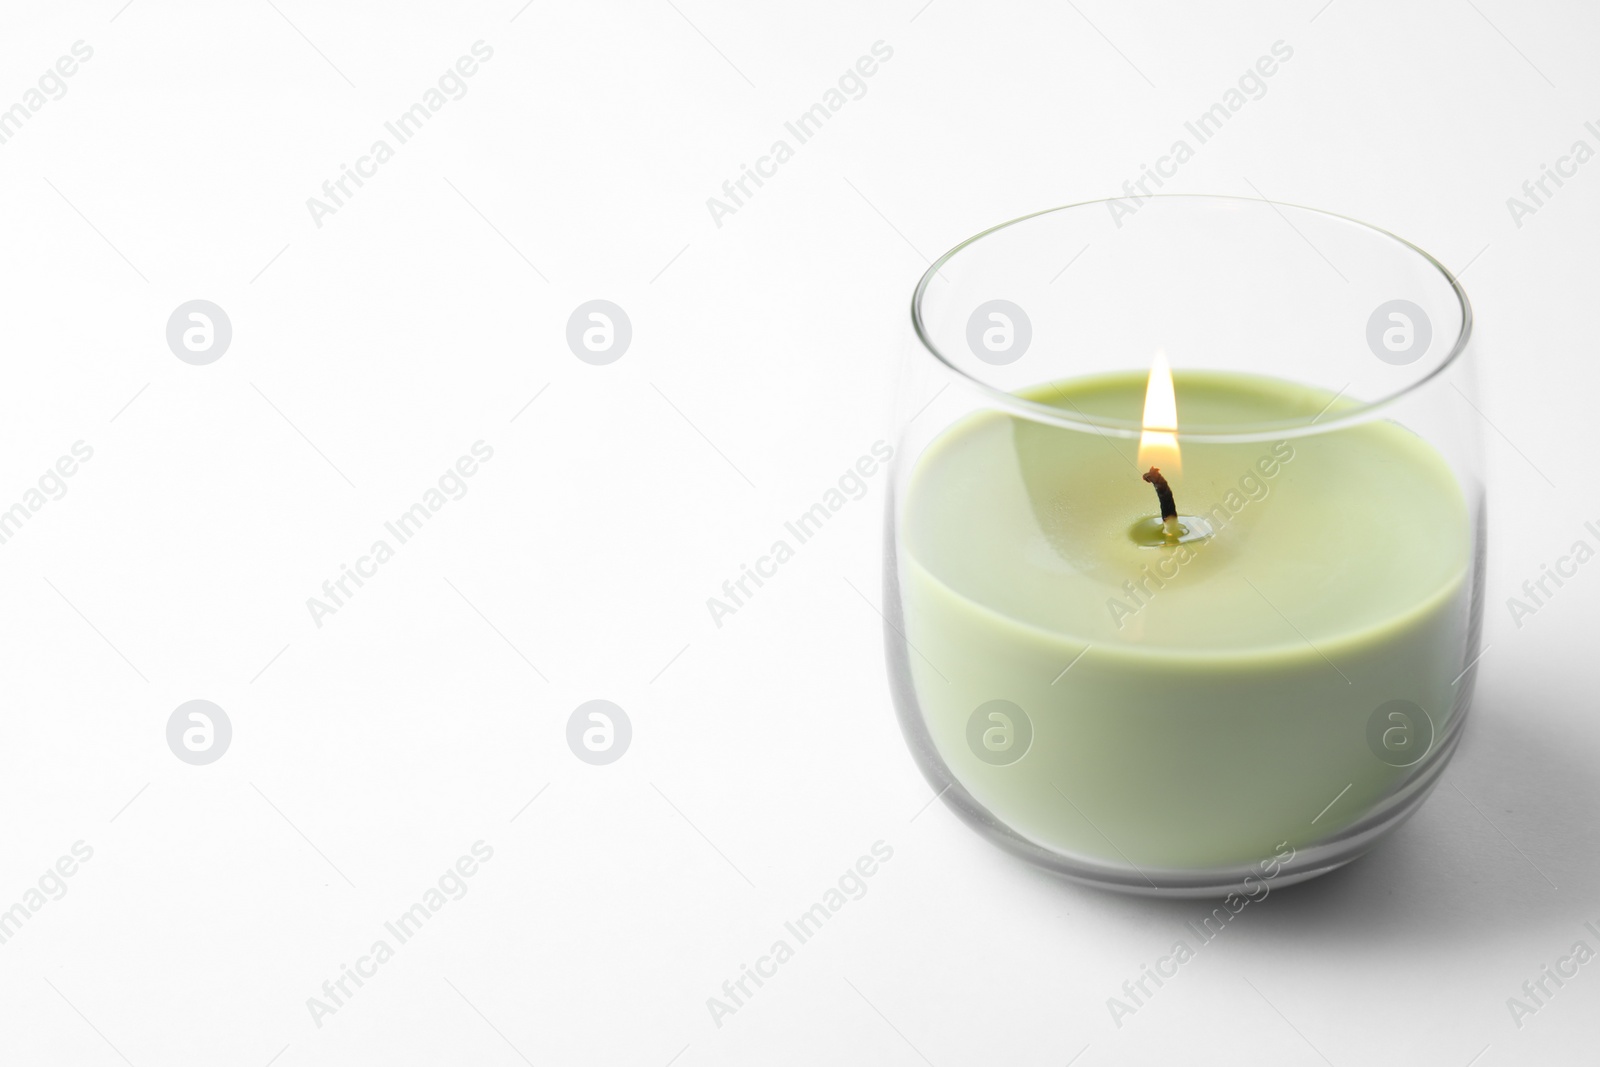 Photo of Green wax candle in glass holder isolated on white